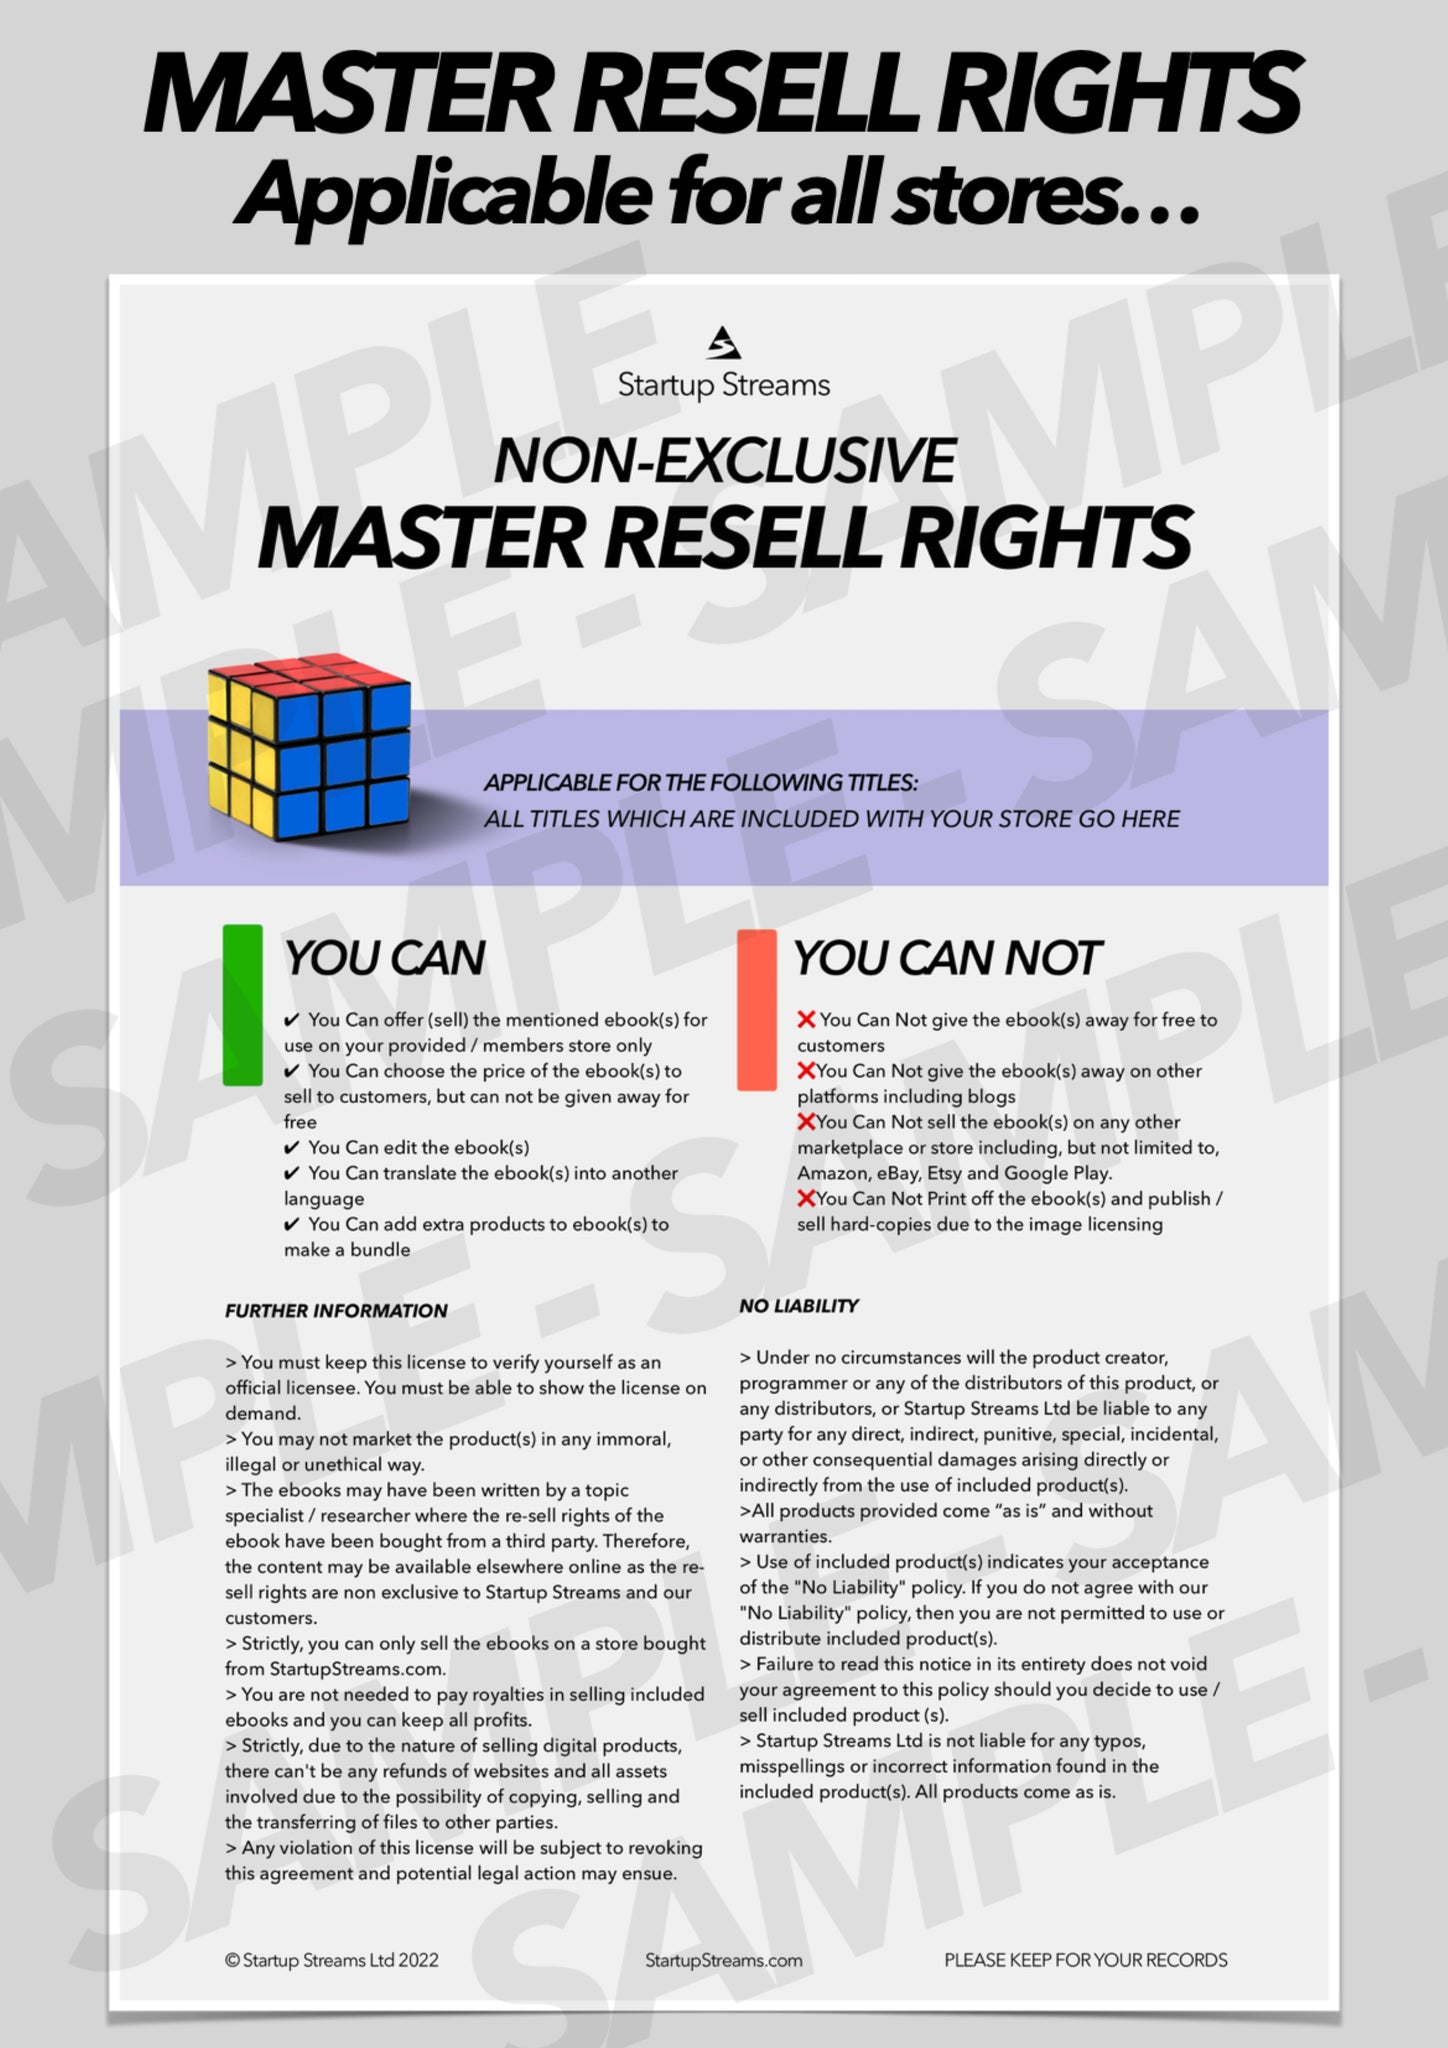 Startup Streams Master Resell Rights